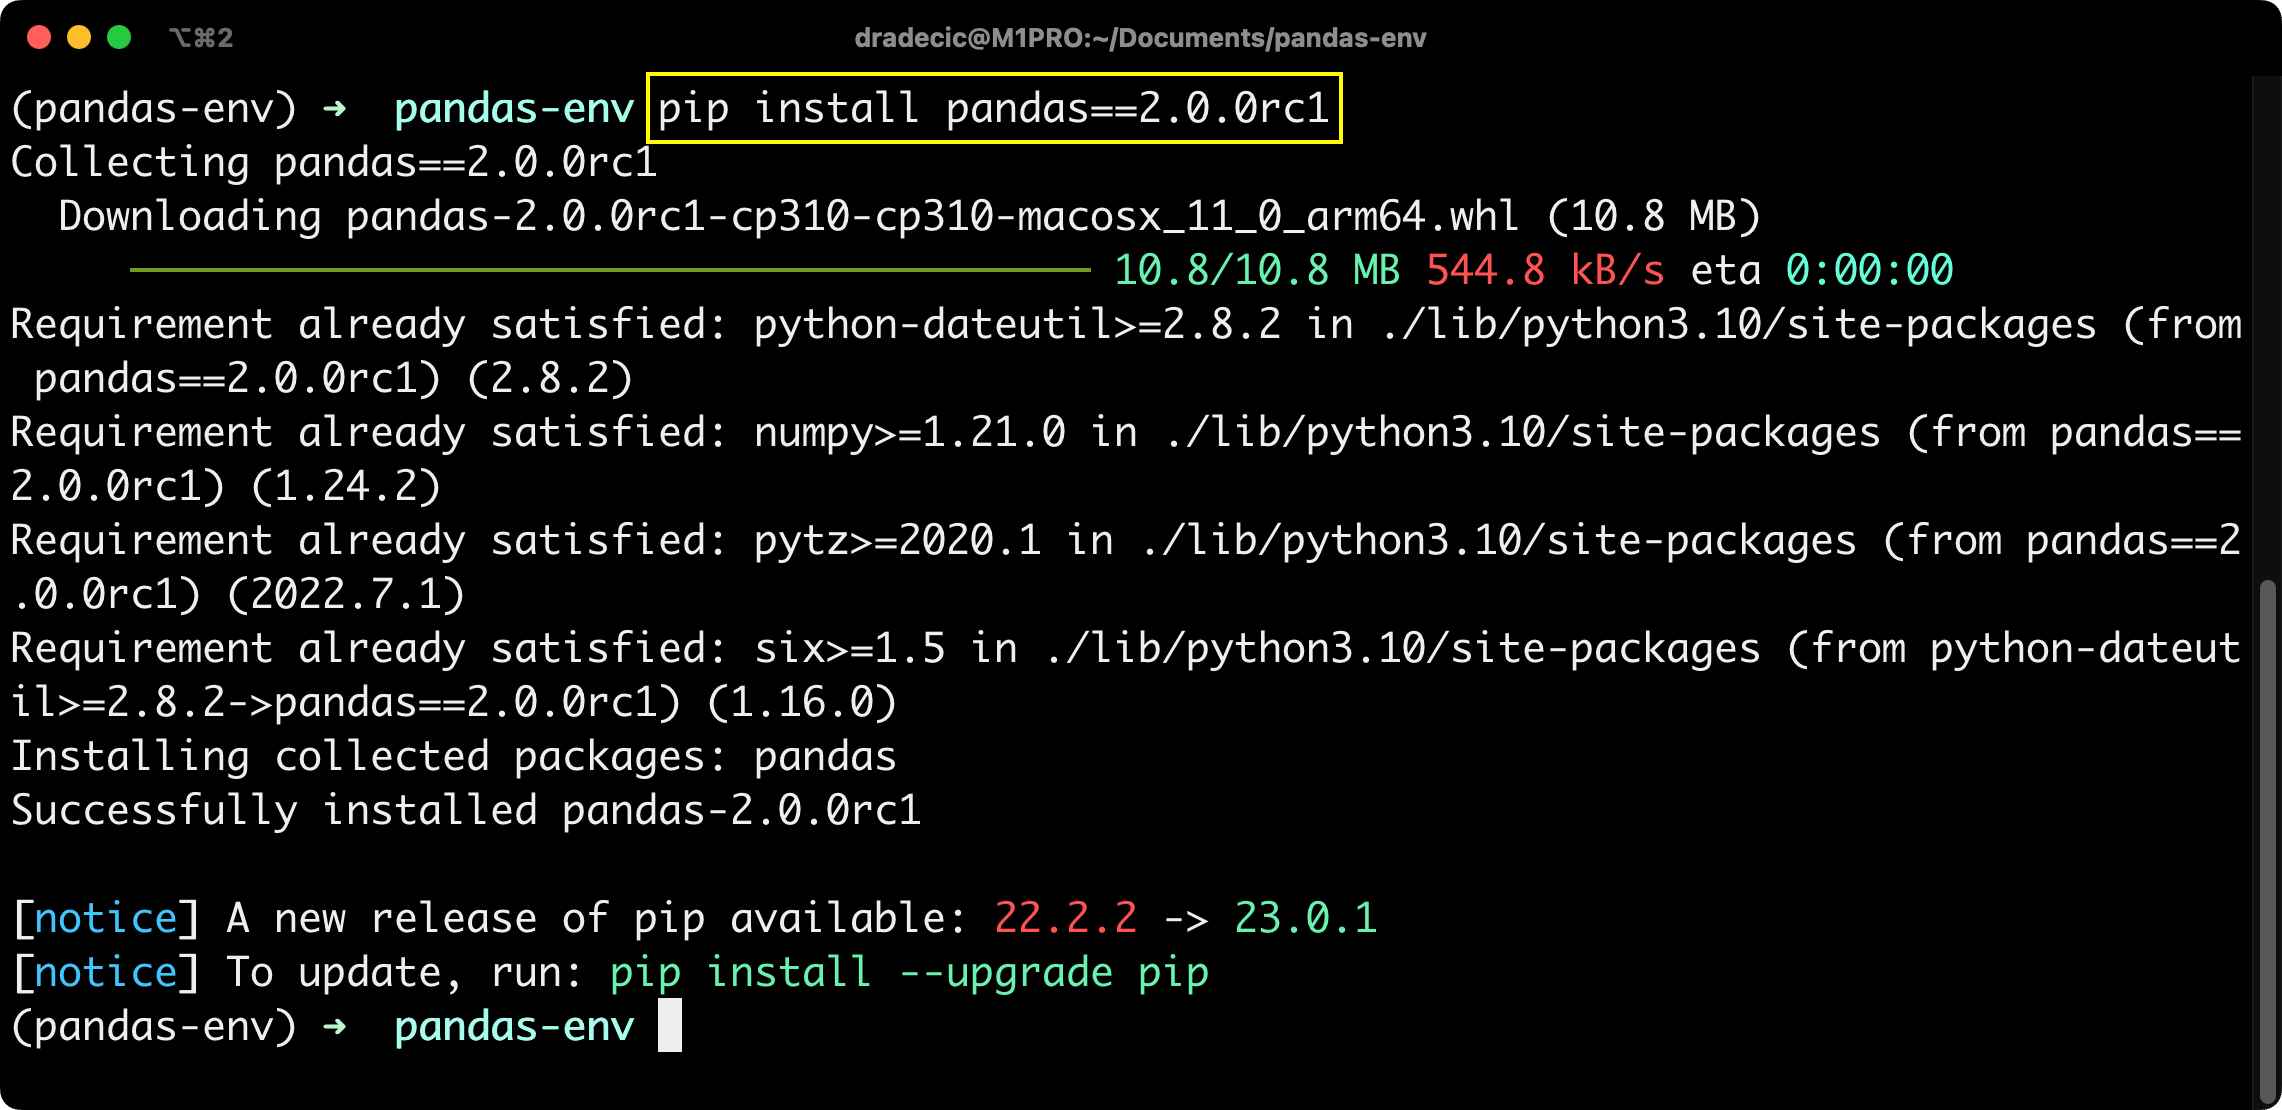 Image 1 - Installing Pandas 2.0 with Pip (Image by author)